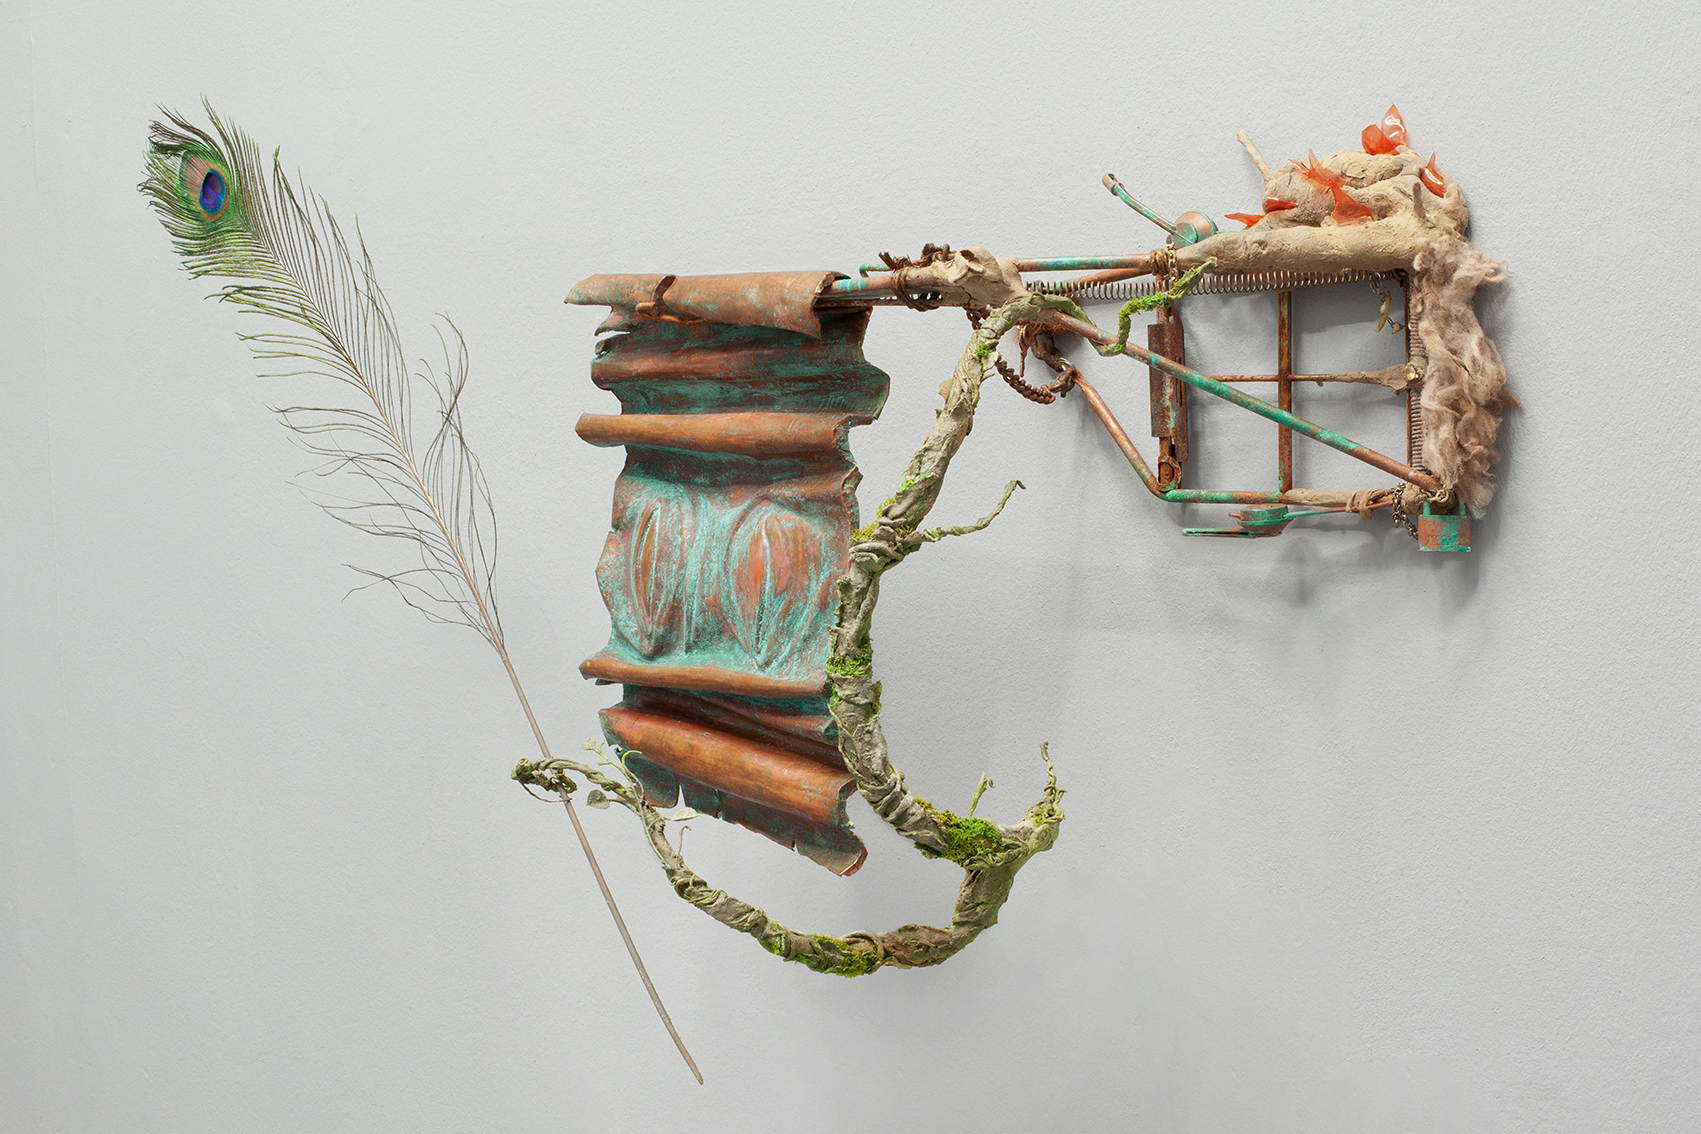 Egolatra IV, 2022, epoxy clay, concrete, acrylic paint, embossed copper, feathers, found objects, metal, wood, 60/60/20 cm